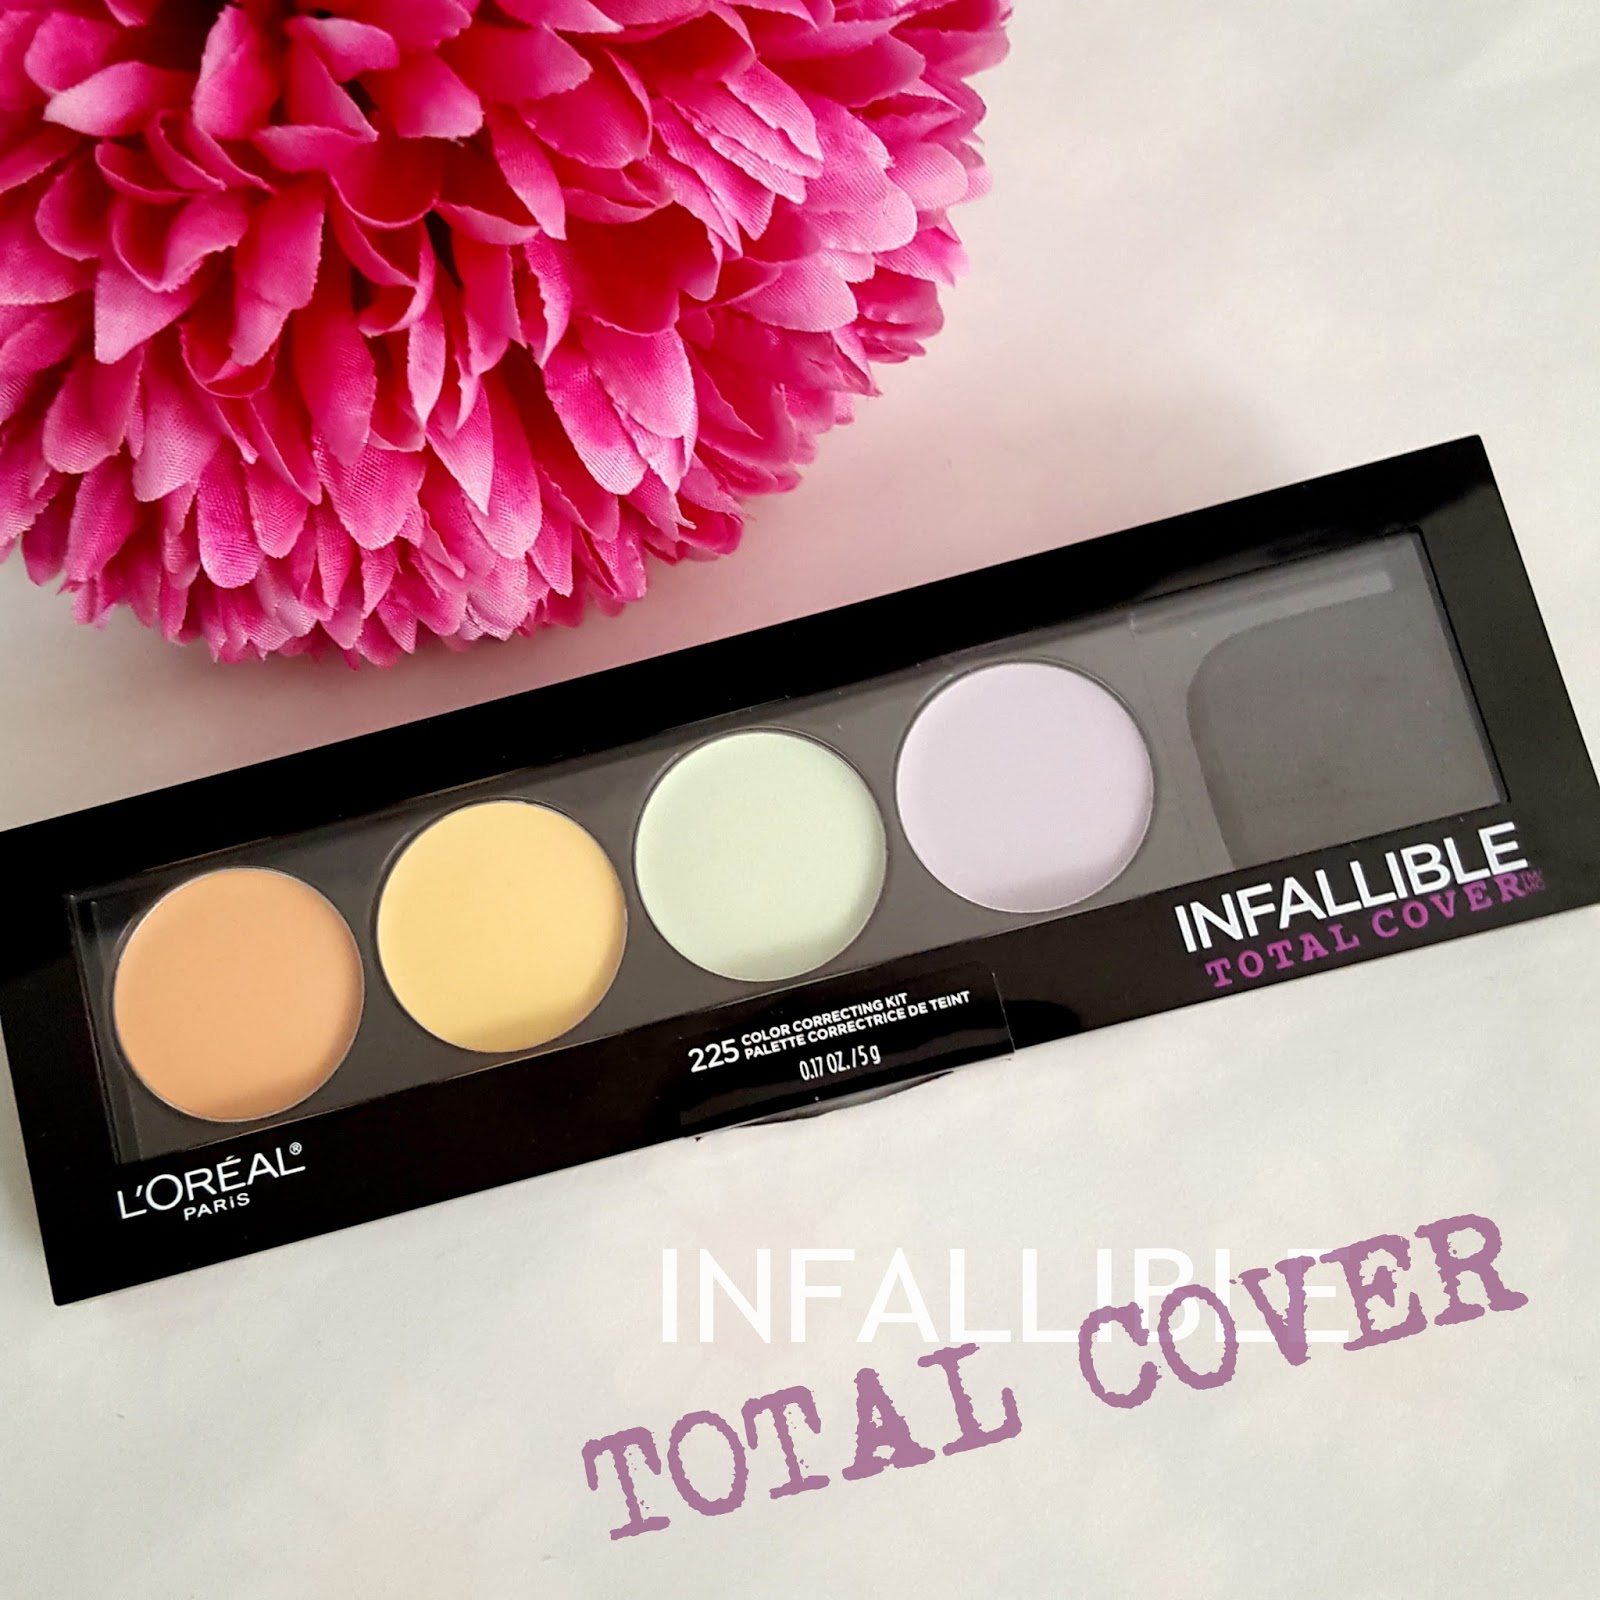 L'Oreal Infallible Total Cover Colour Correcting Concealer kit review -